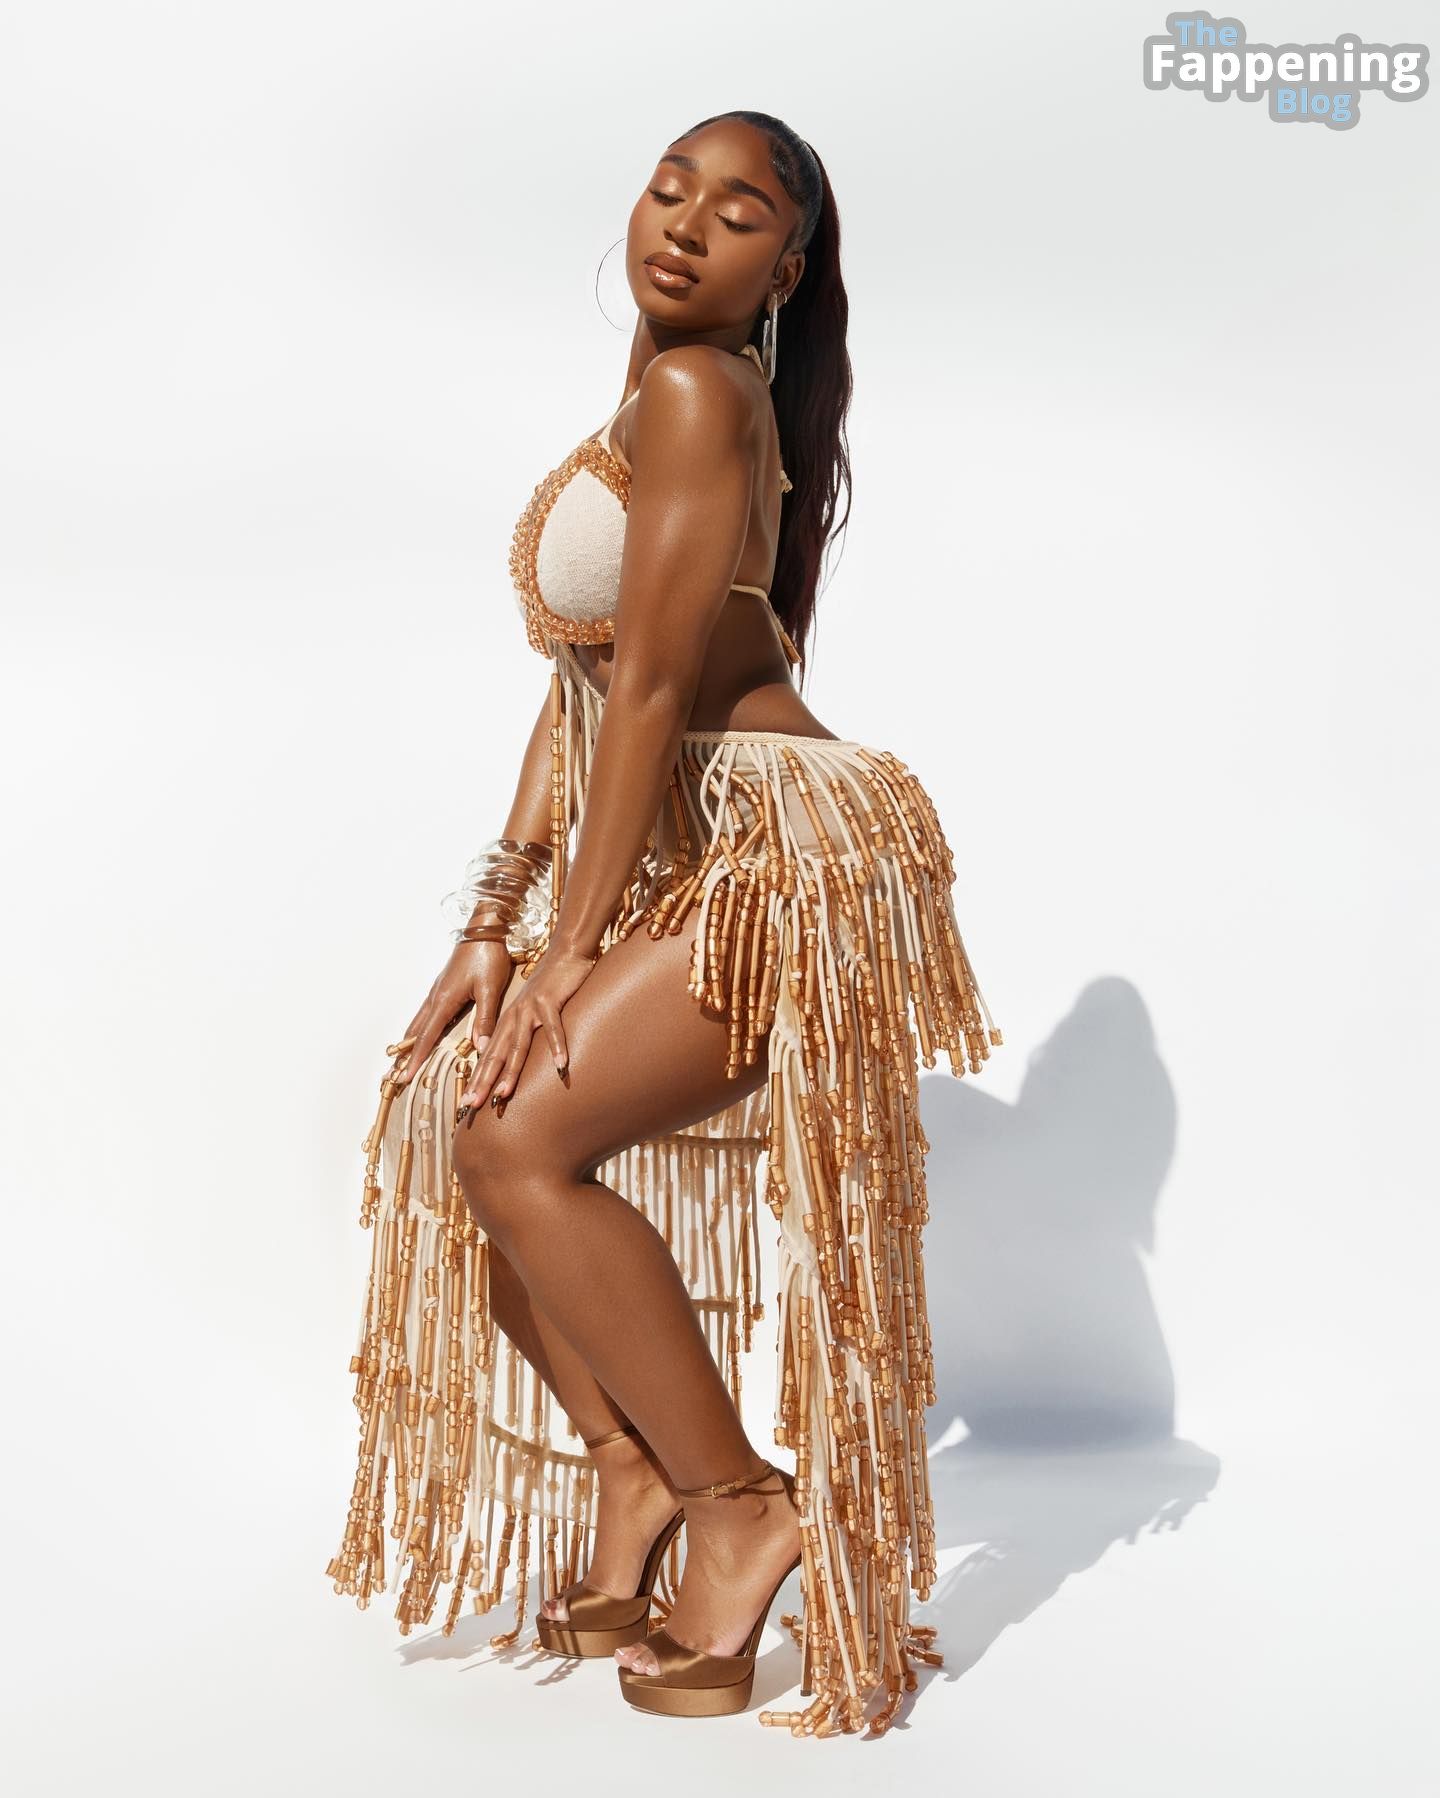 Normani-Sexy-The-Fappening-Blog-2.jpg